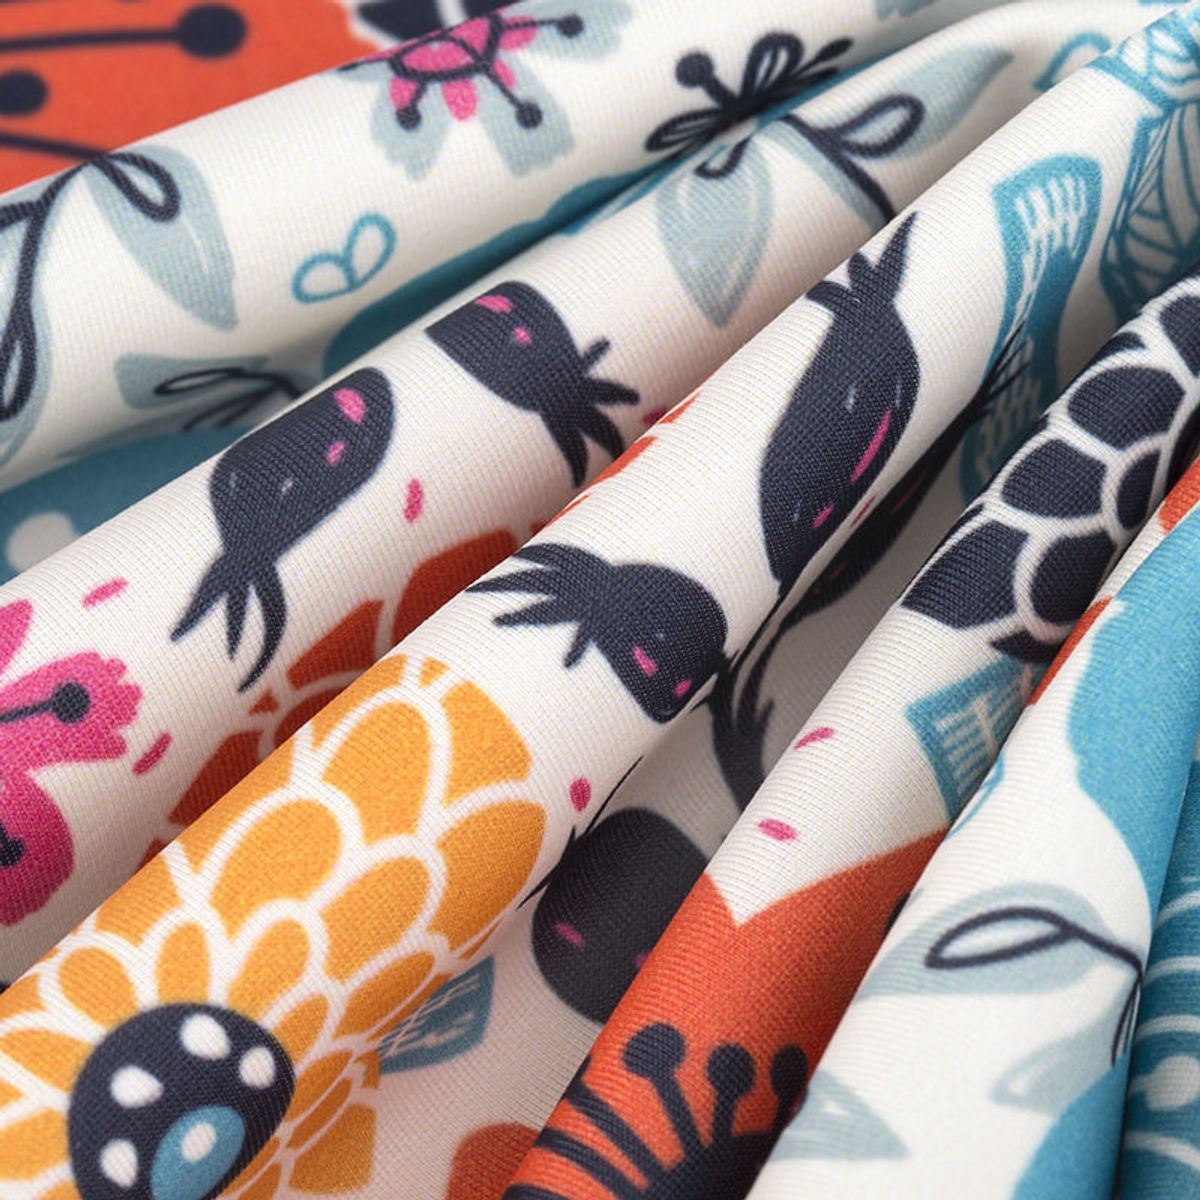 Print your own Swimsuit fabric – Jersey Print Factory